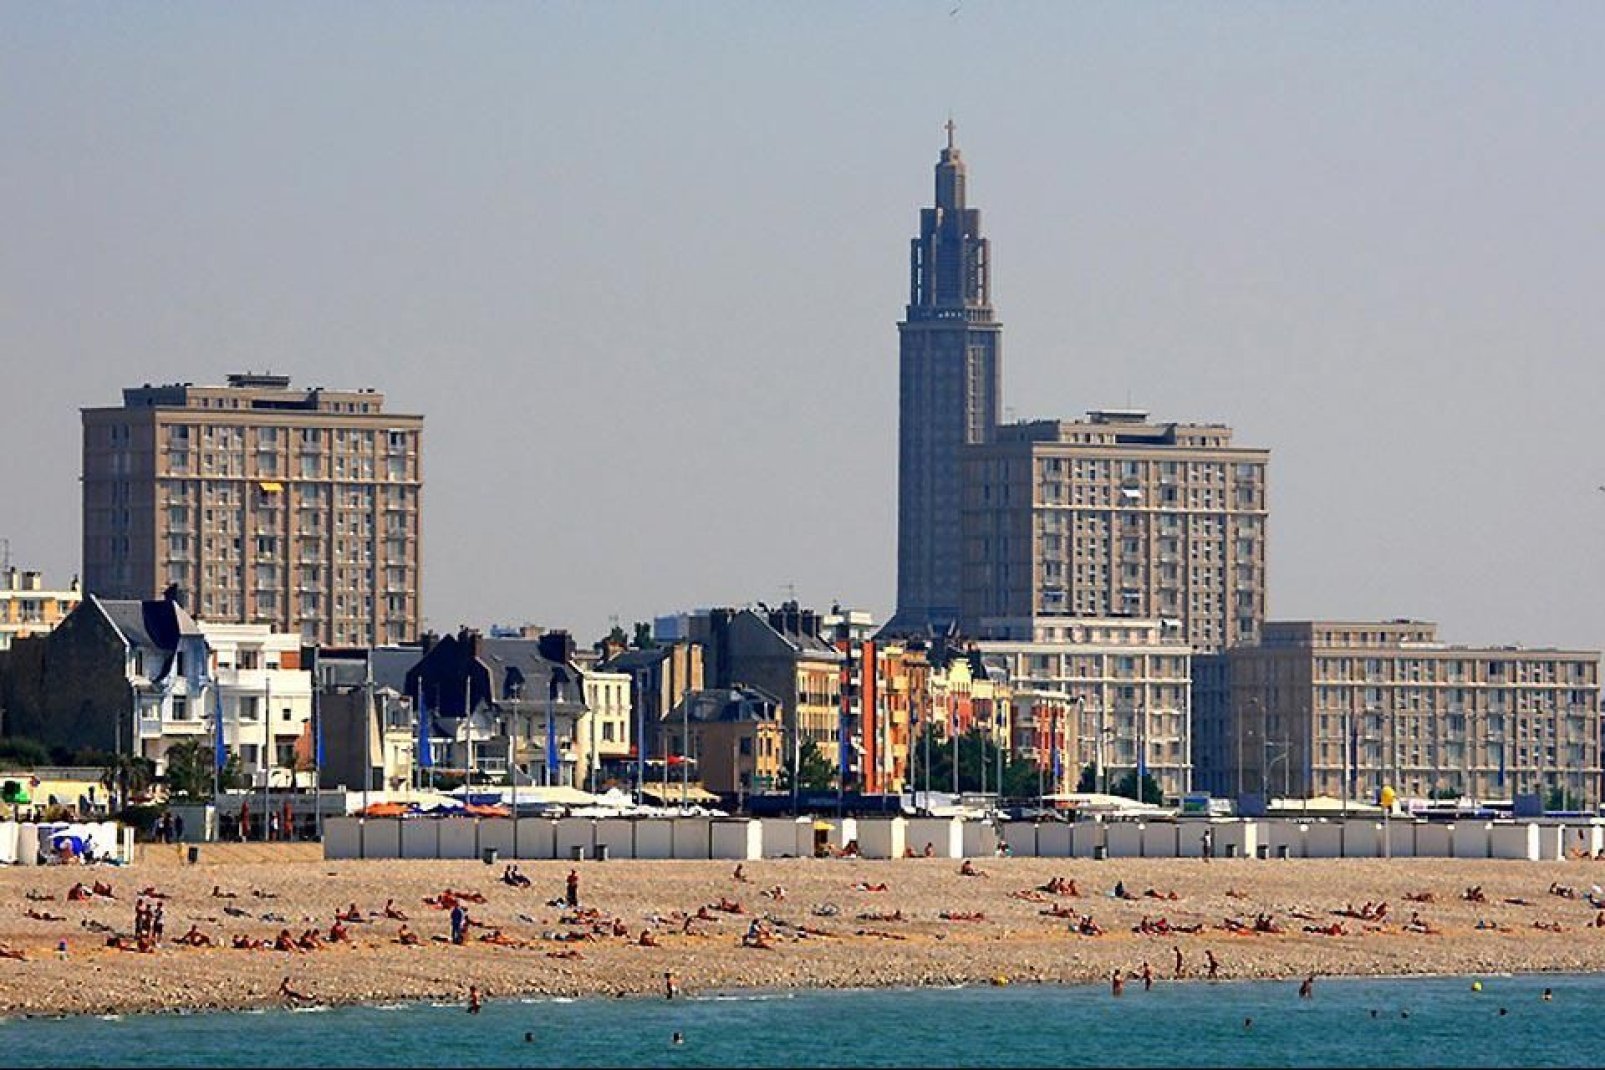 500 metres from the city centre, you can take advantage of a mile long beach made up of pebbles and sand.